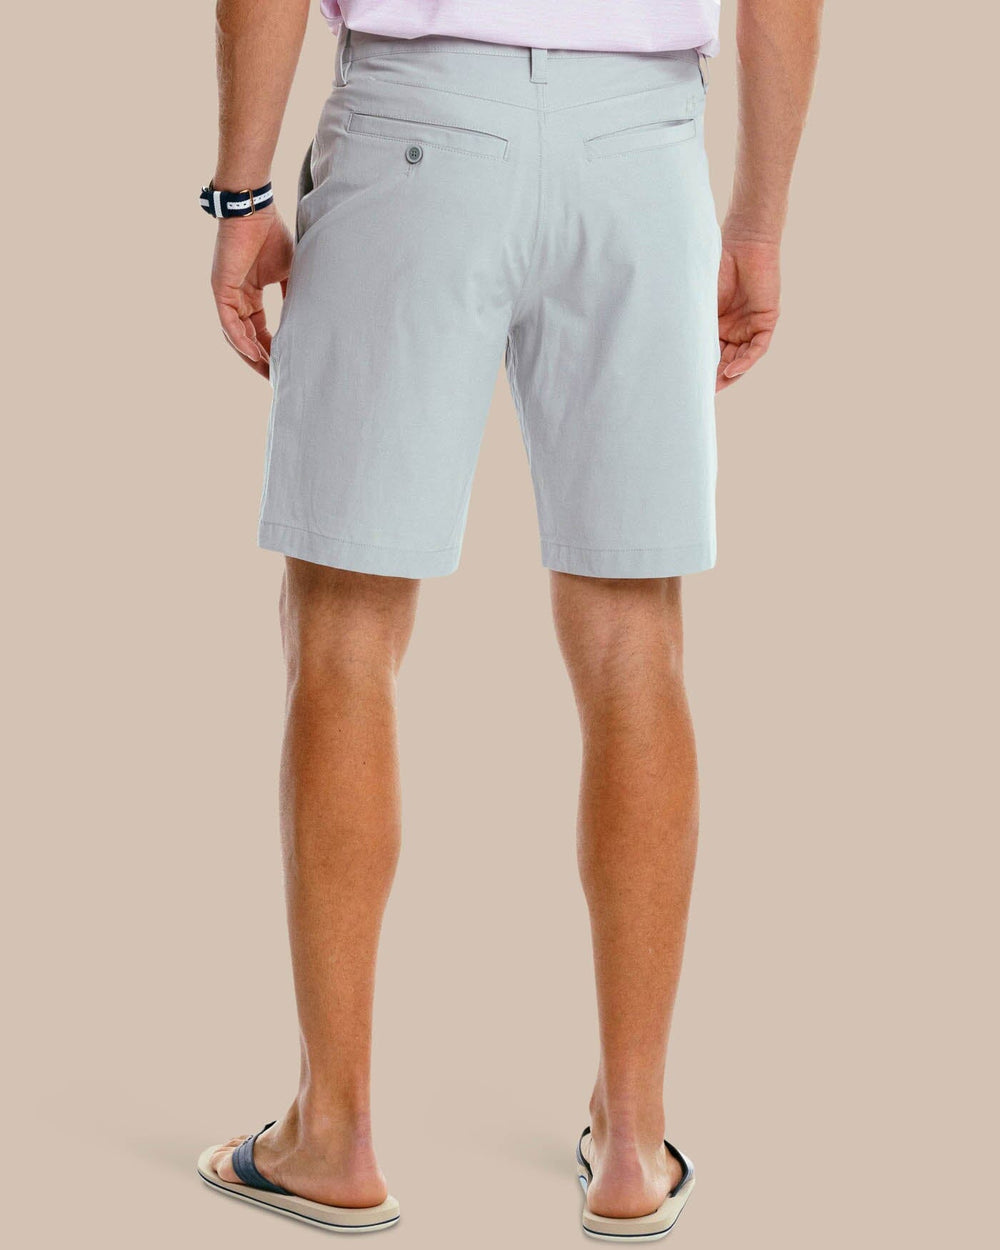 The back of the Men's T3 Gulf 9 Inch Performance Short by Southern Tide - Seagull Grey